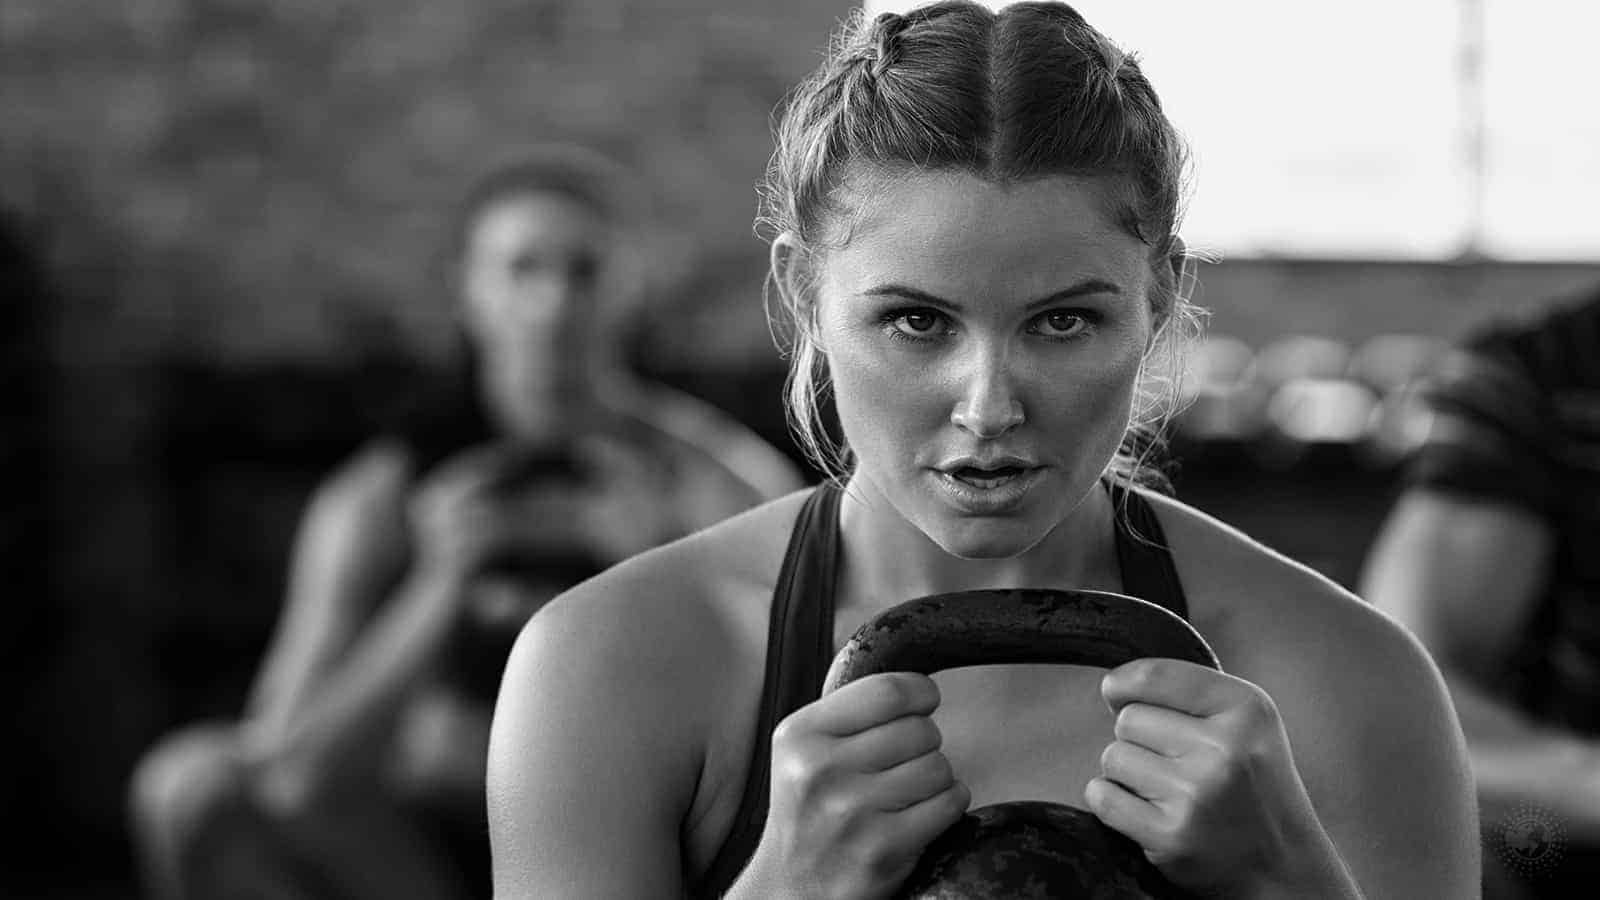 Scientists Explain How One Workout Can Boost Brainpower for 2 Hours